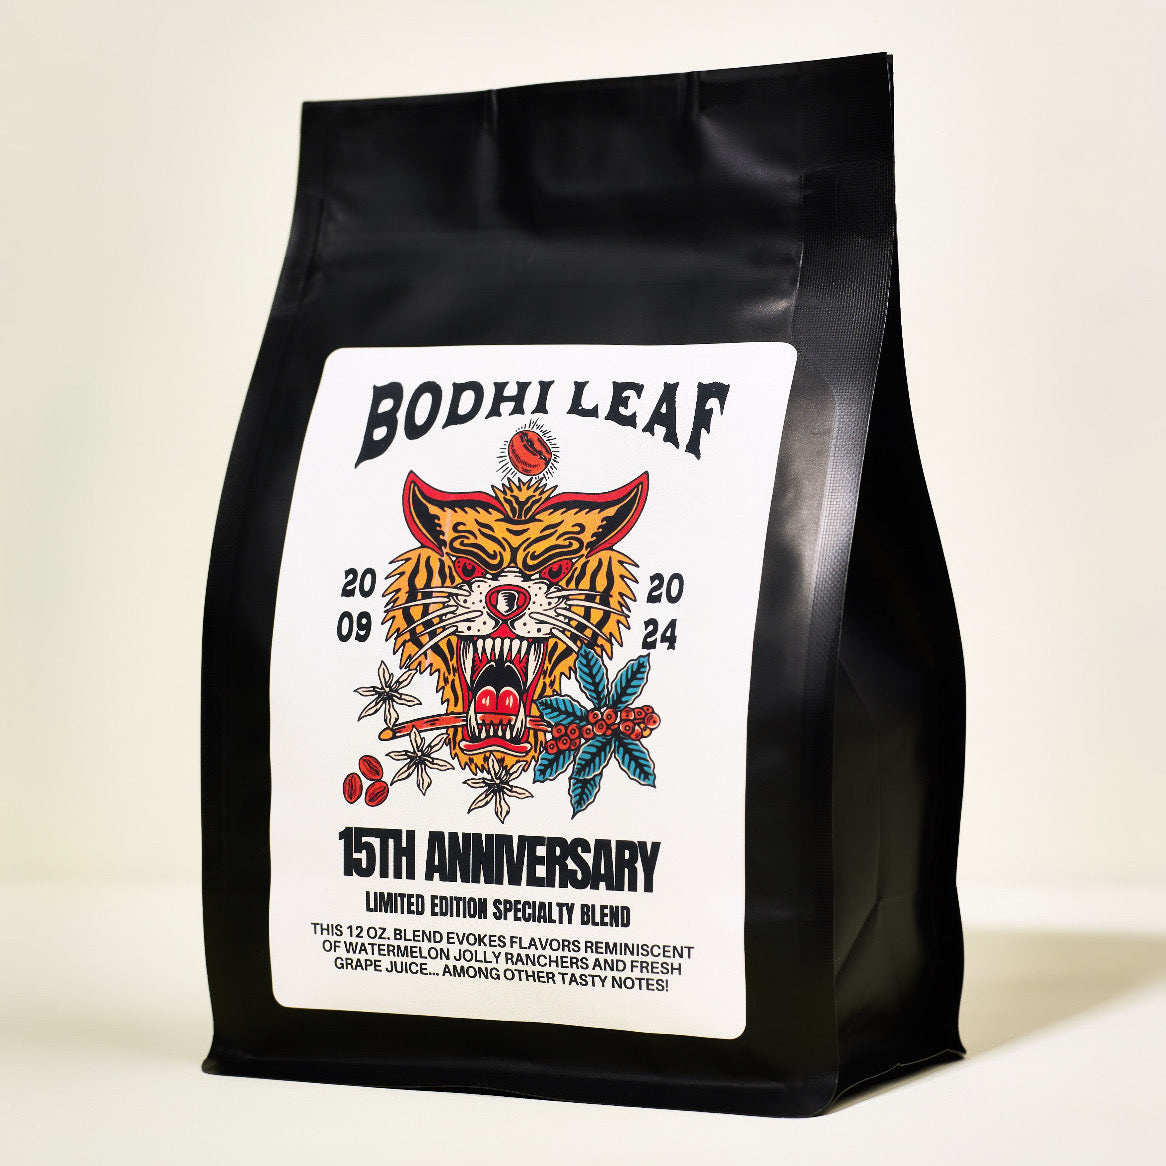 Black bag of roasted coffee with a white label reading Bodhi Leaf 15th Anniversy Limited Edition Specialty Blend